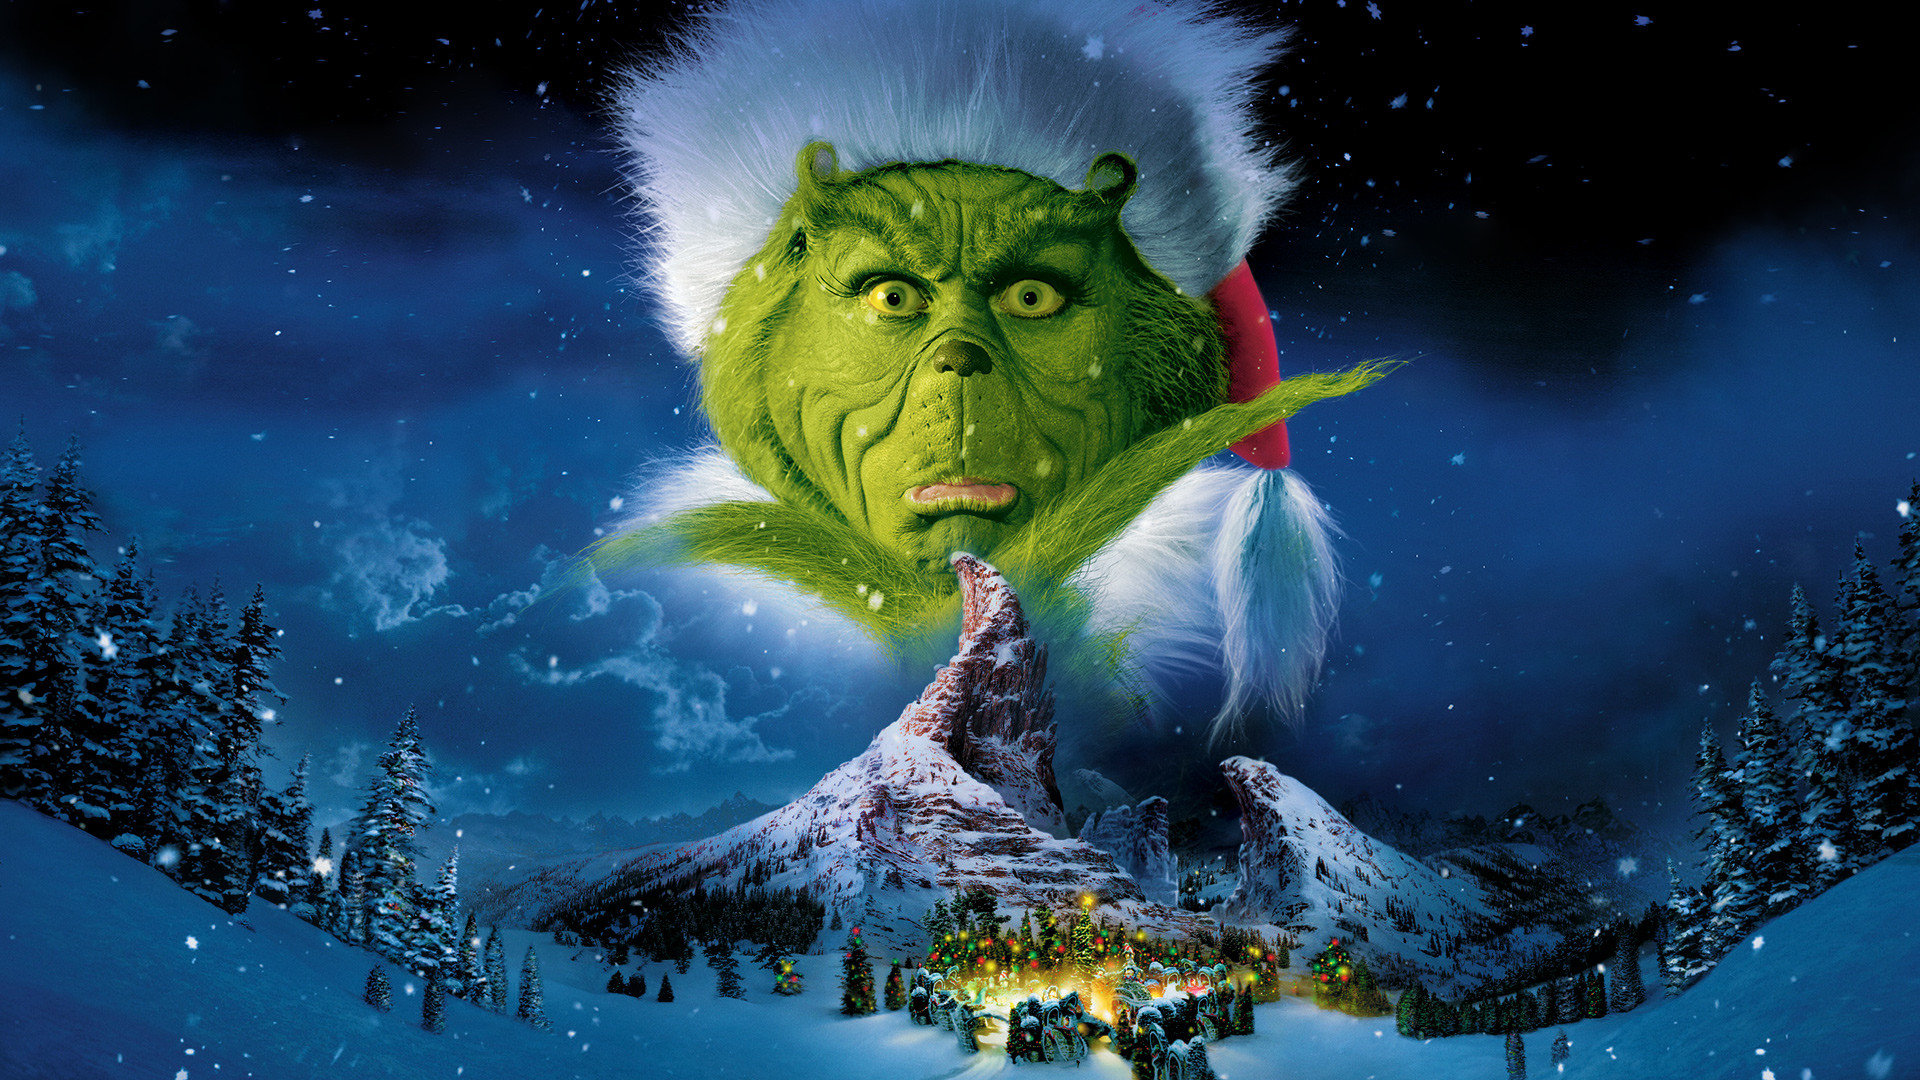 1920x1080 How the Grinch Stole Christmas image